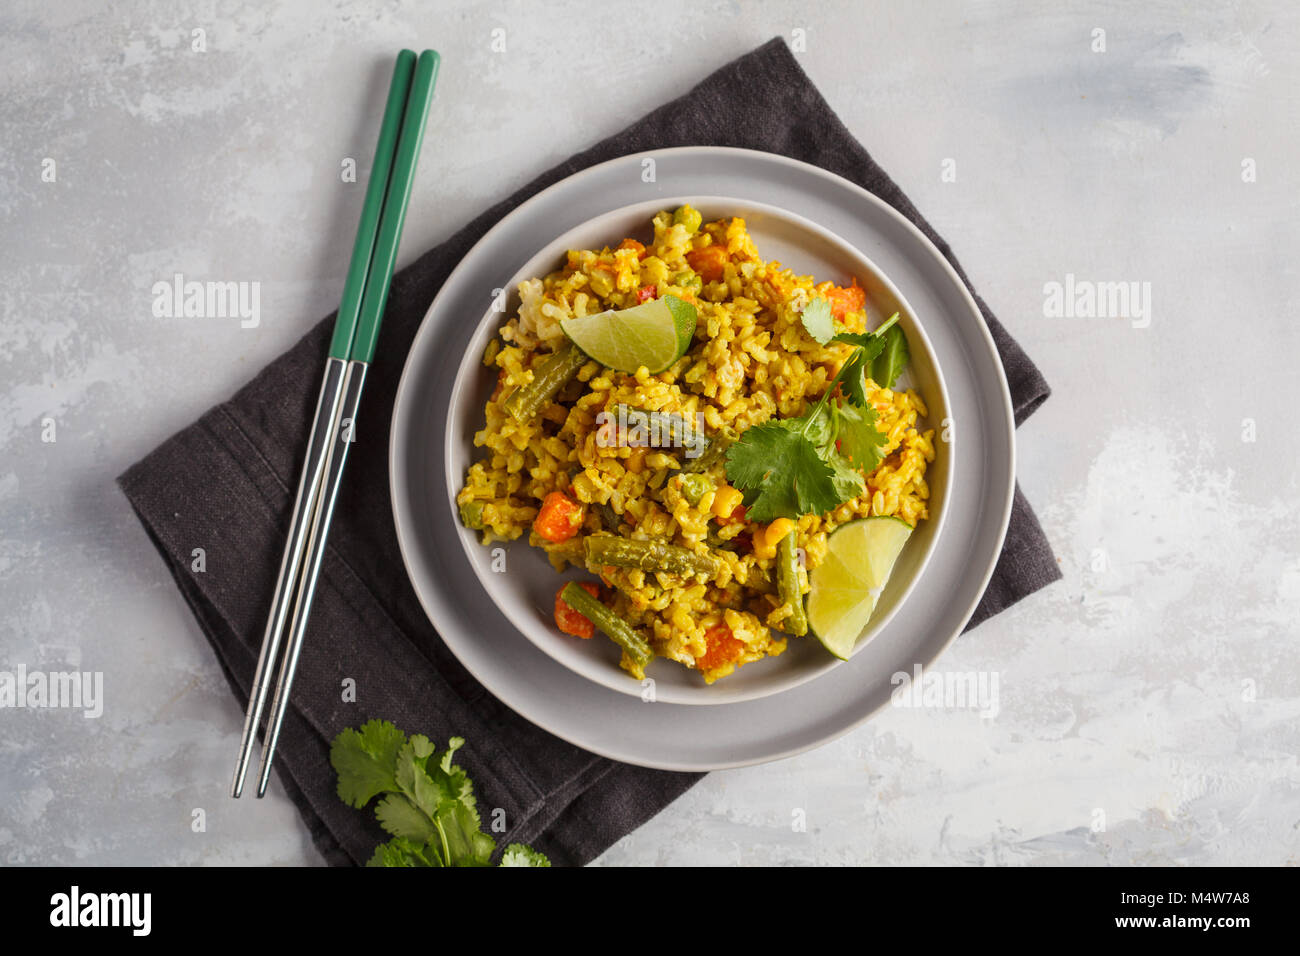 Vegetarian curry rice with vegetables in a gray plate. Healthy vegan food concept, detox. Stock Photo